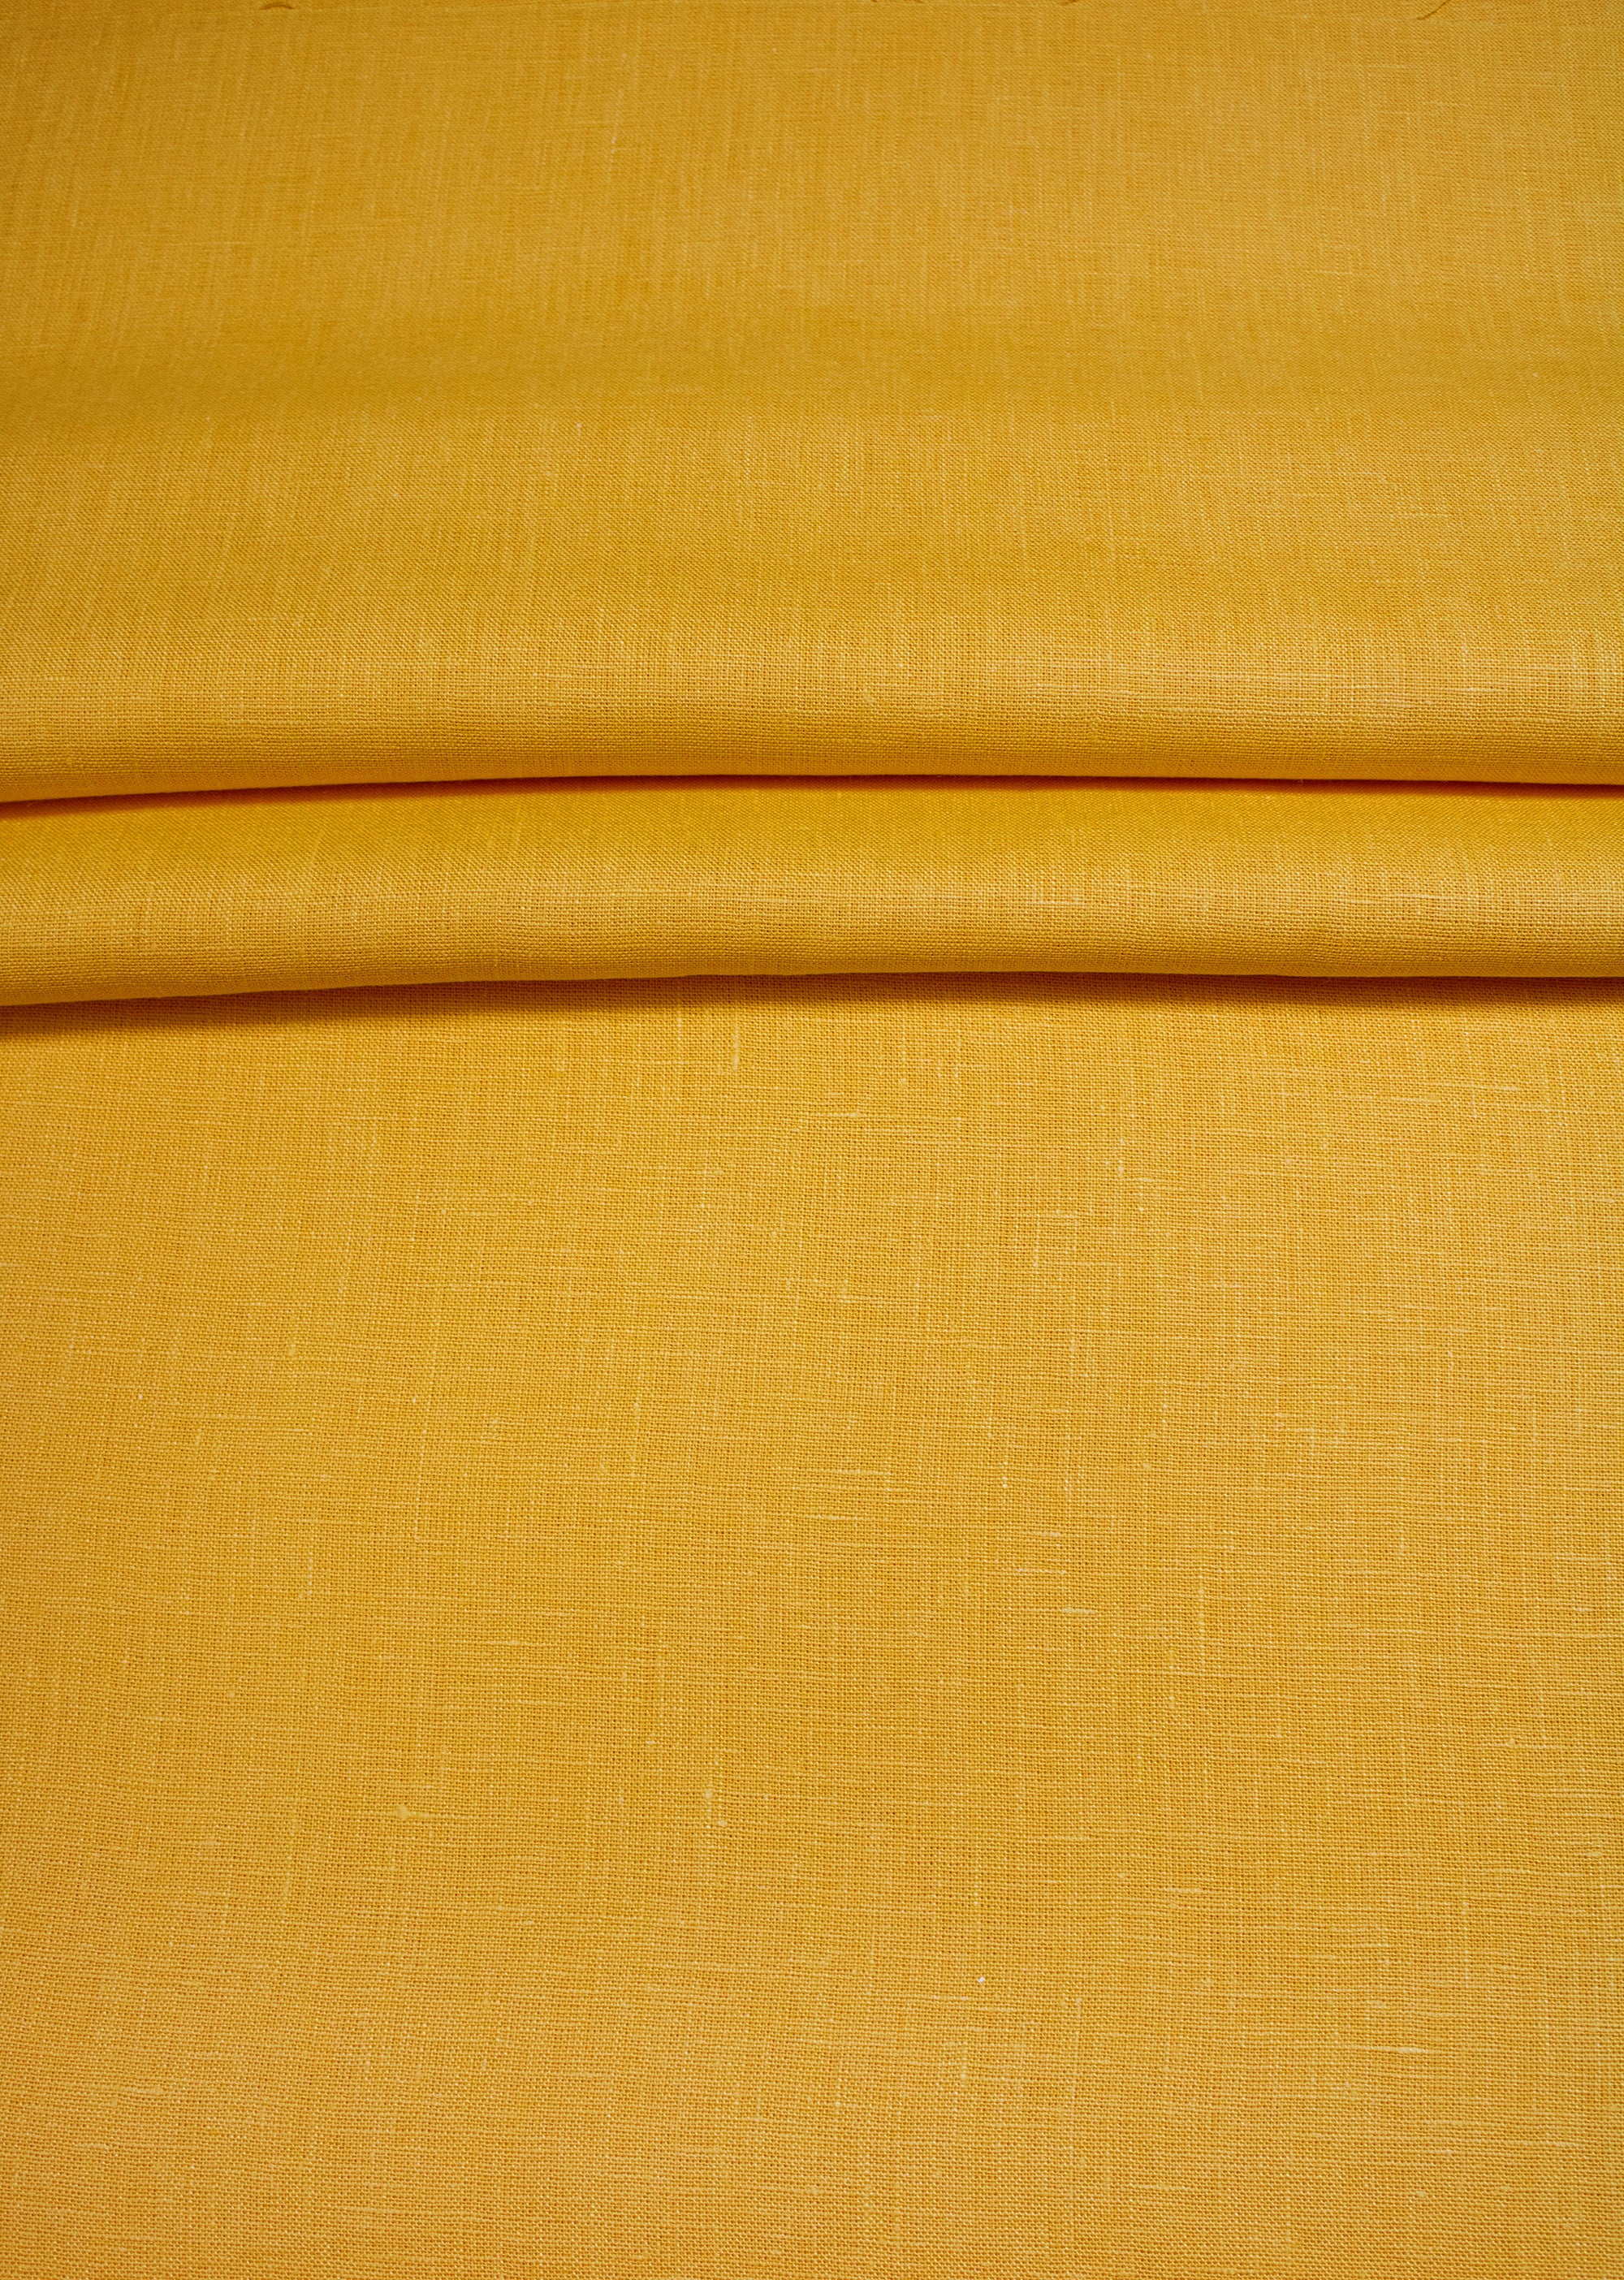 Luca-S Pure Natural 100% Linen Soft Fabric